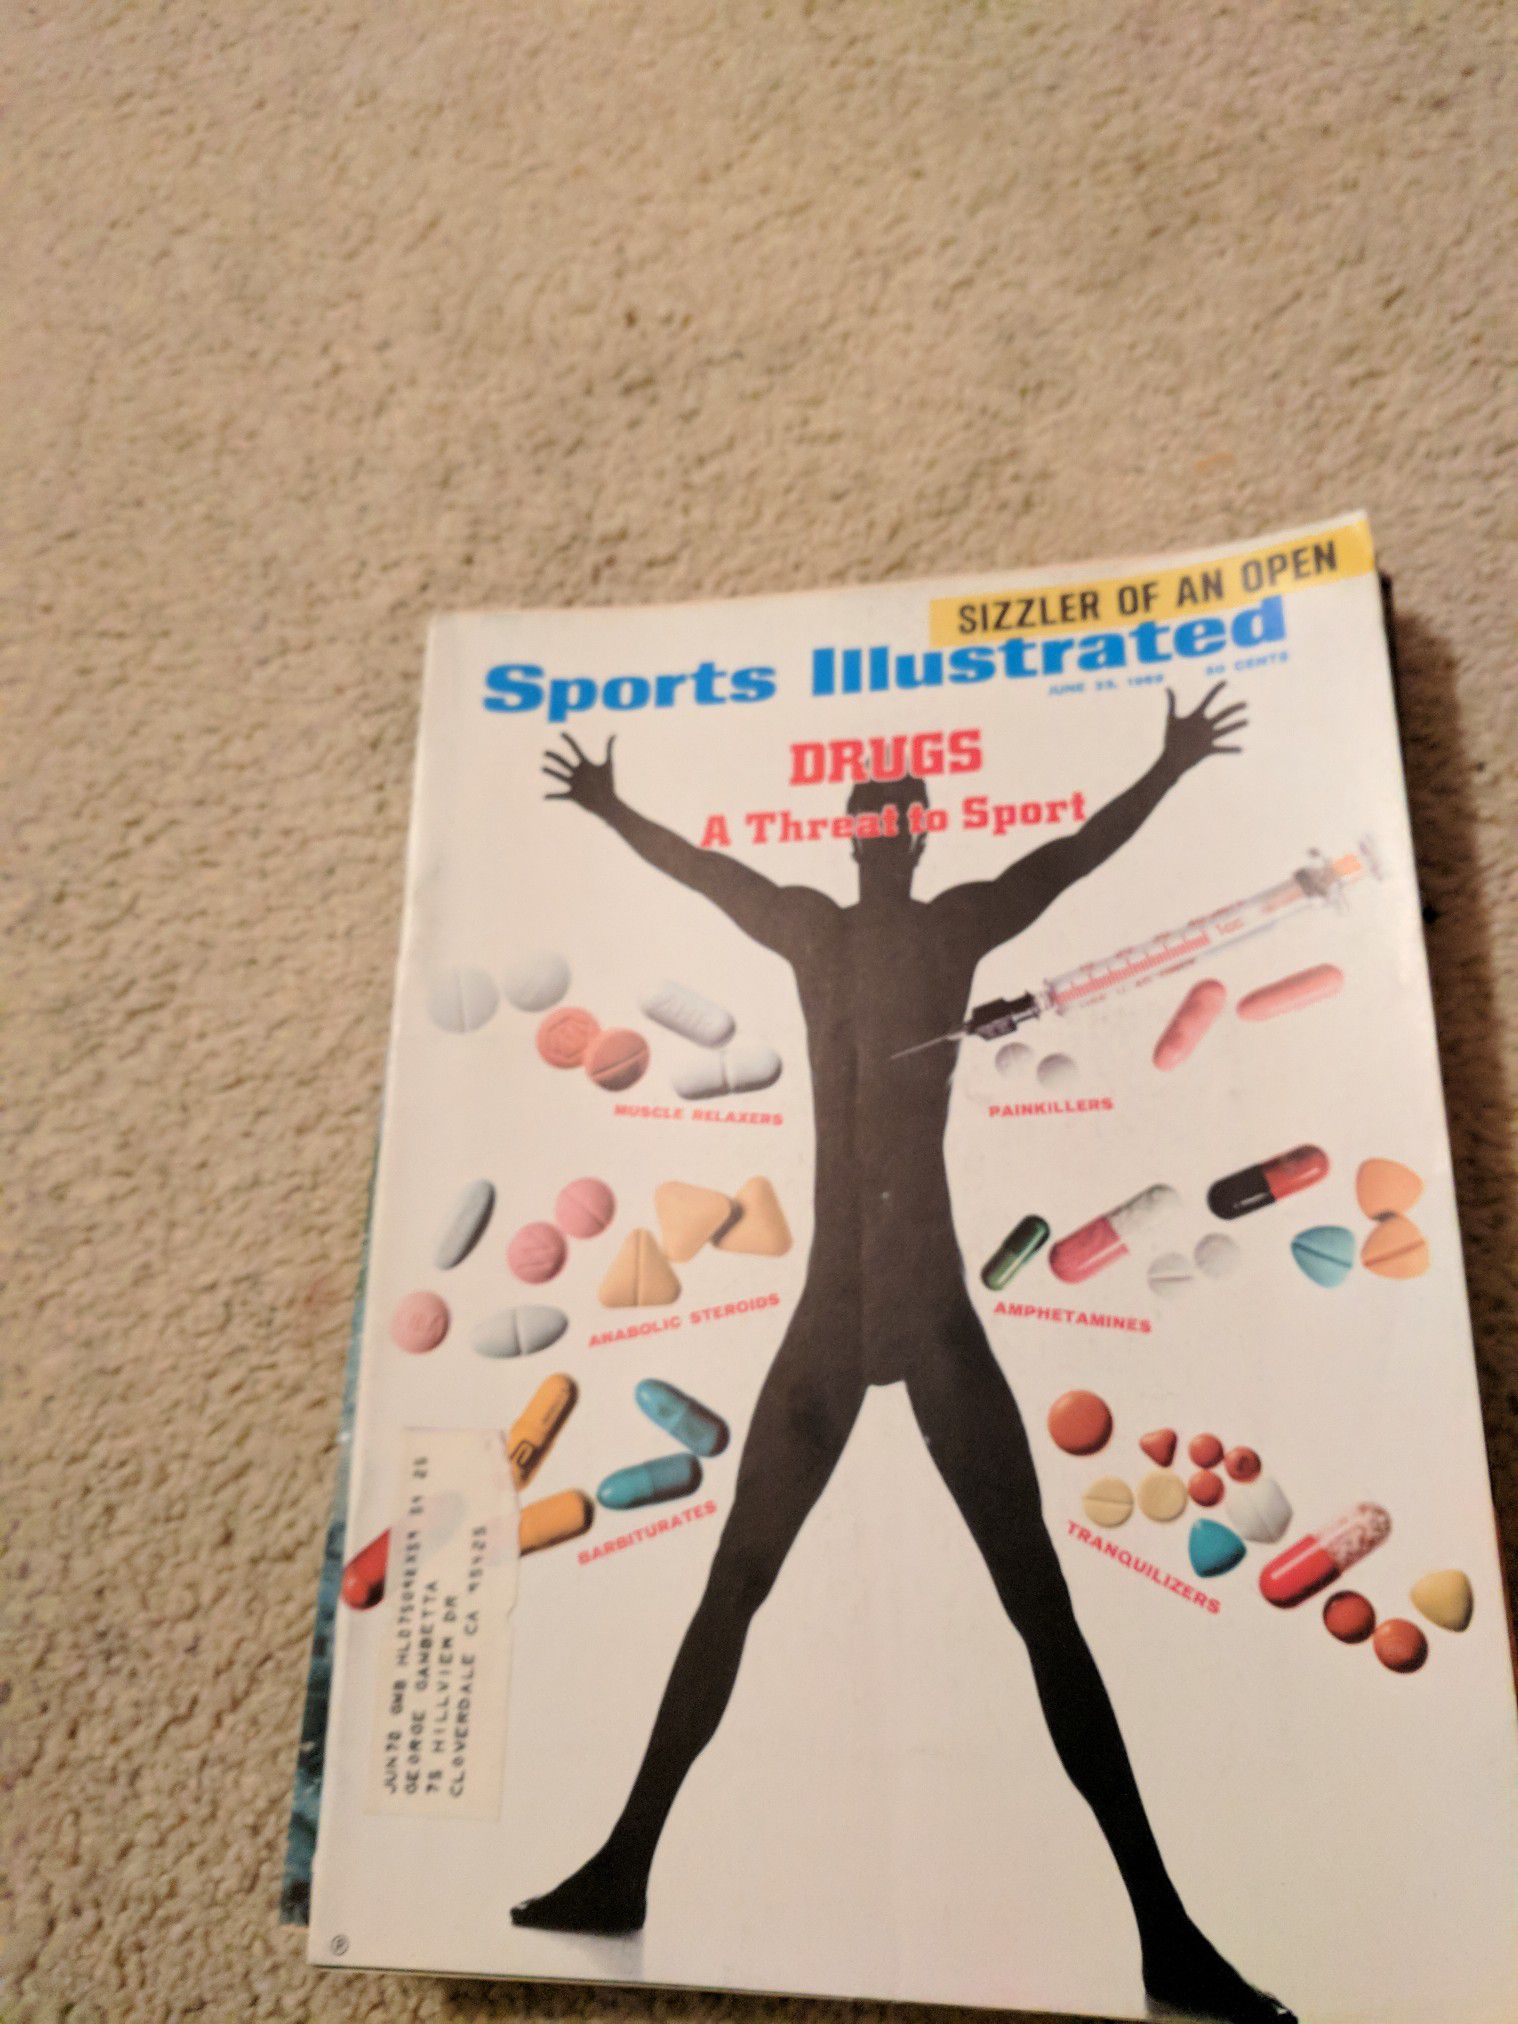 1969 sports illustrated Drugs